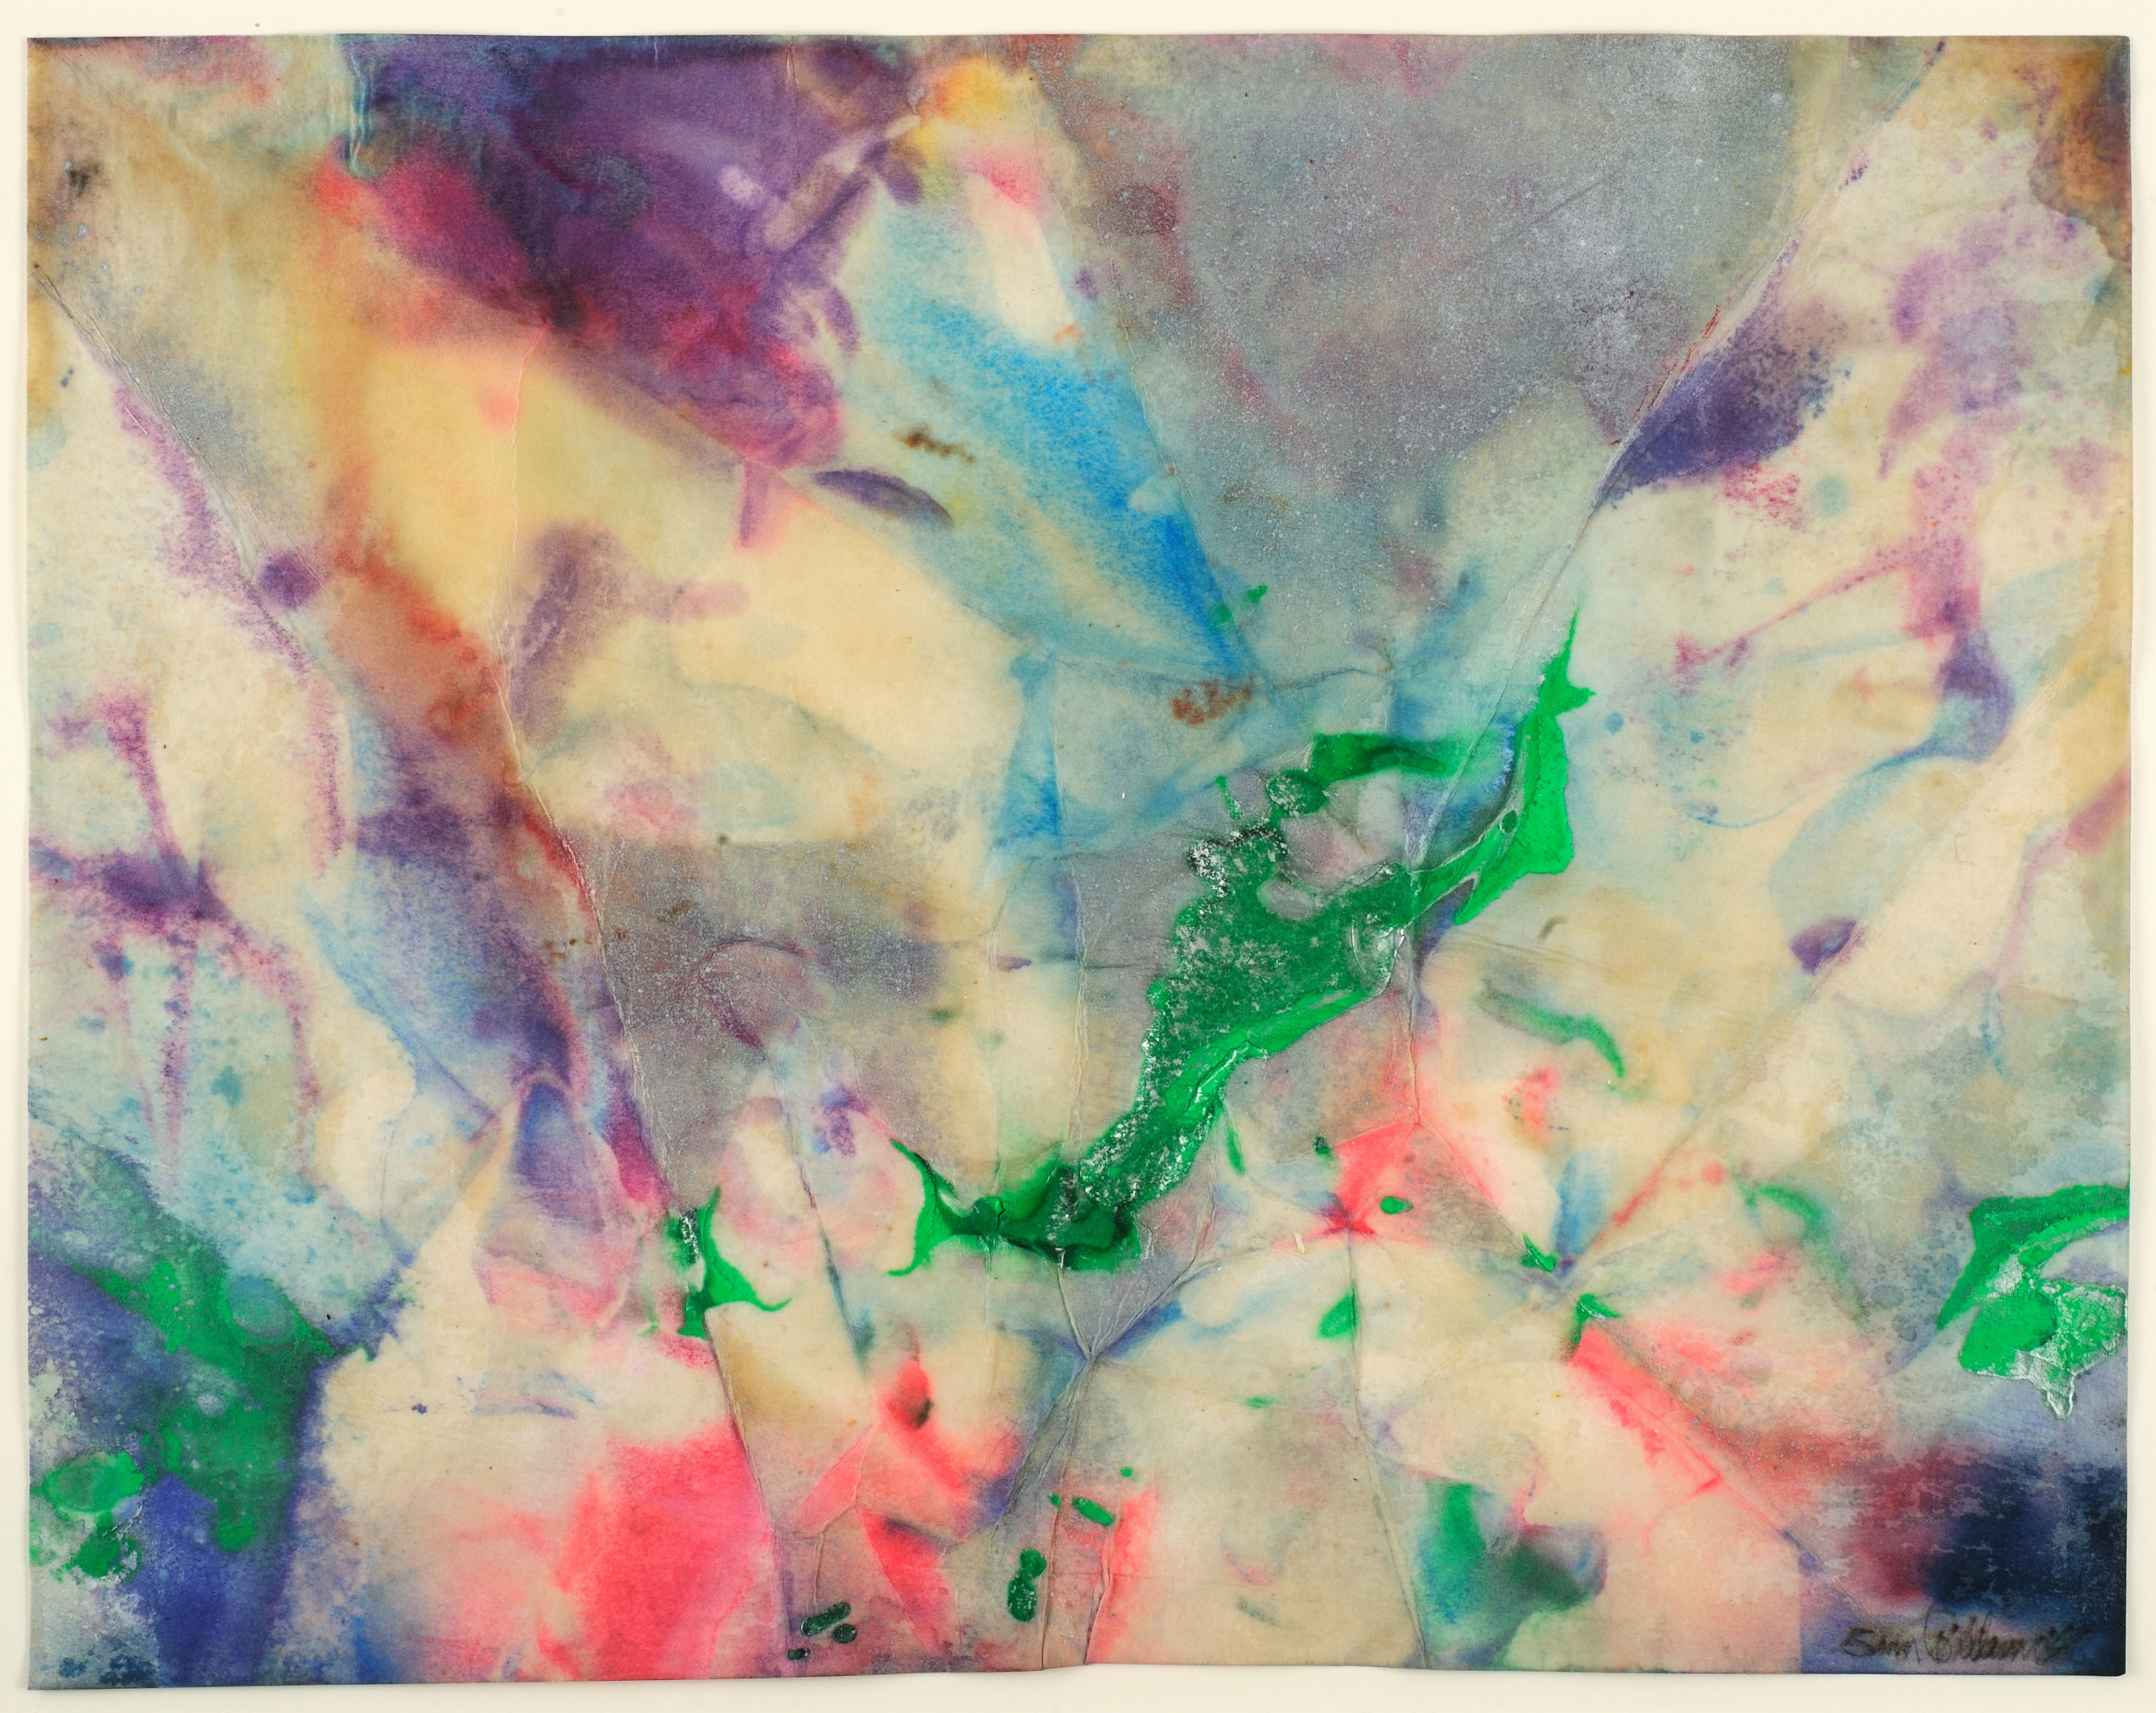 Sam Gilliam, Untitled (detail), 1974, oil acrylic on rice paper. Photo by Gregory Staley, Courtesy of David Kordansky Gallery, Los Angeles, CA, © Sam Gilliam